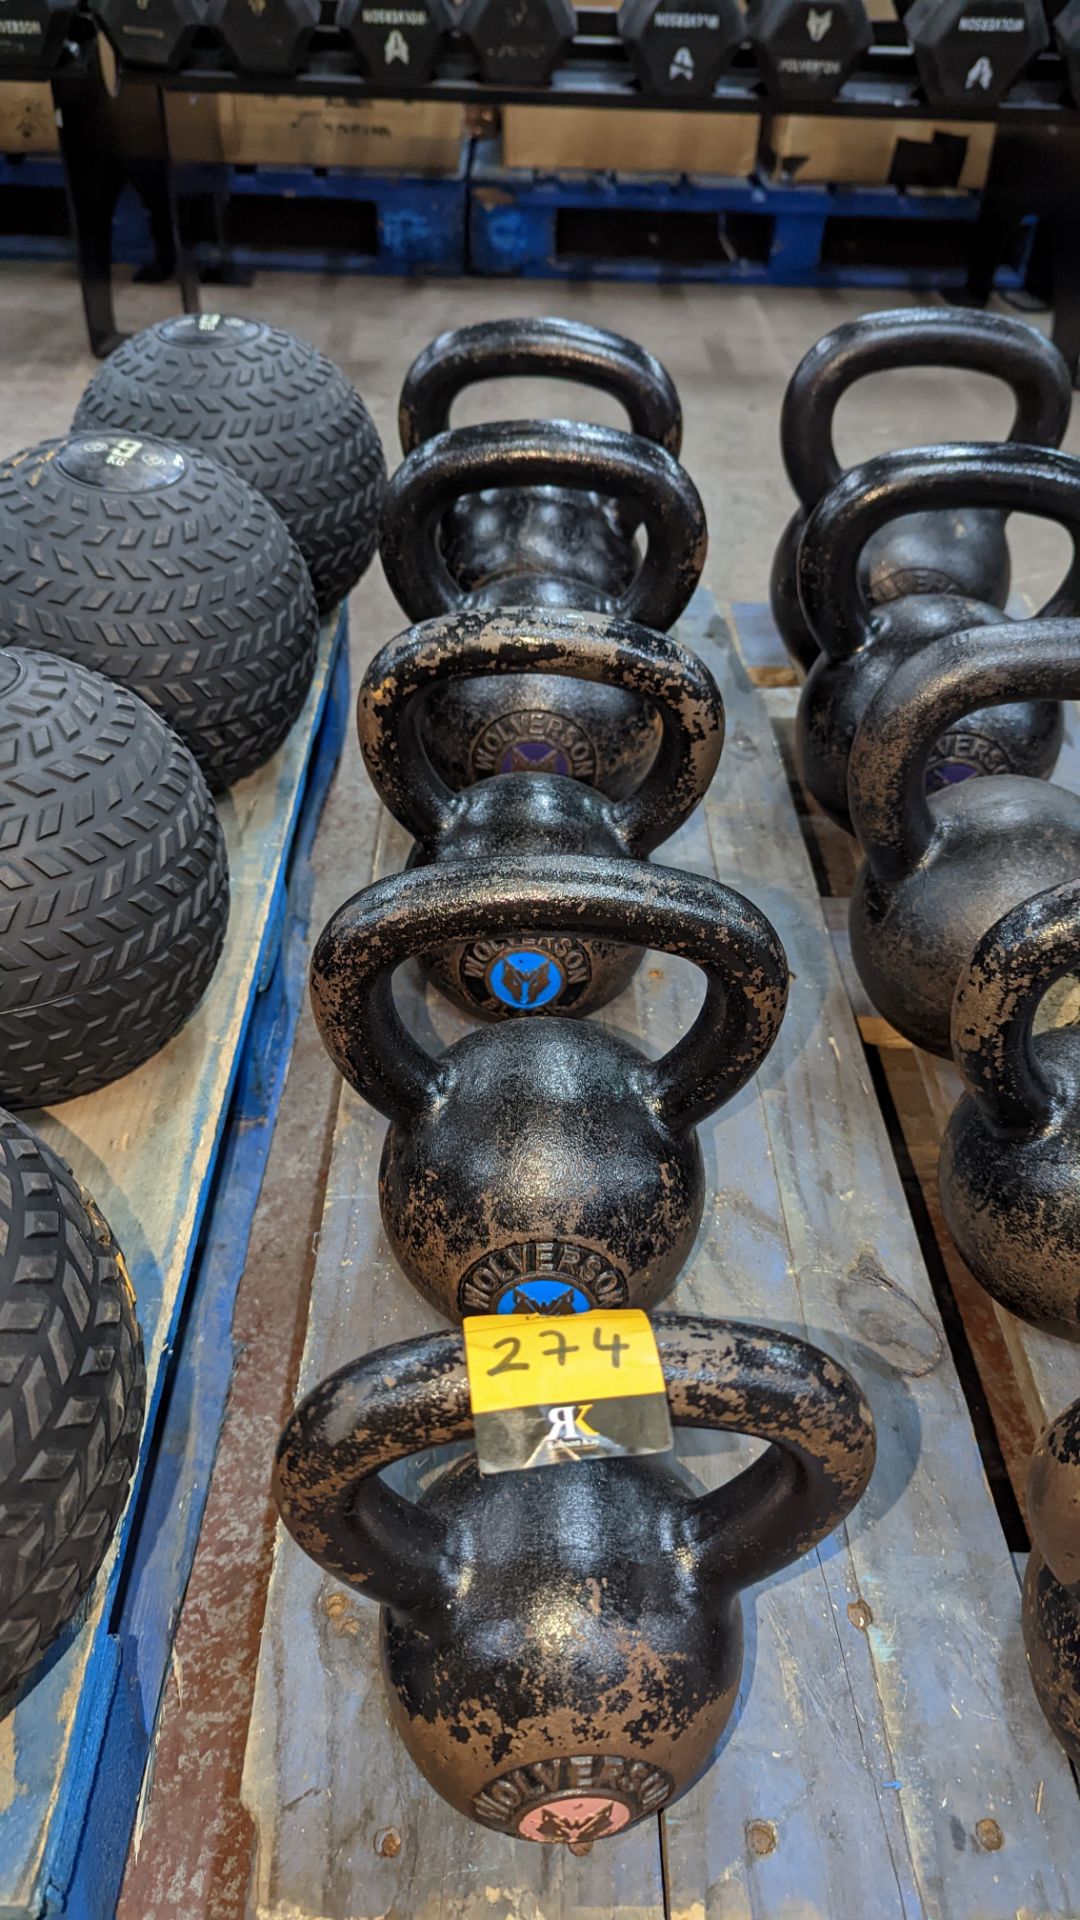 5 off Wolverson kettlebells - this lot comprises 2 x 20kg, 2 x 12kg and 1 x 8kg